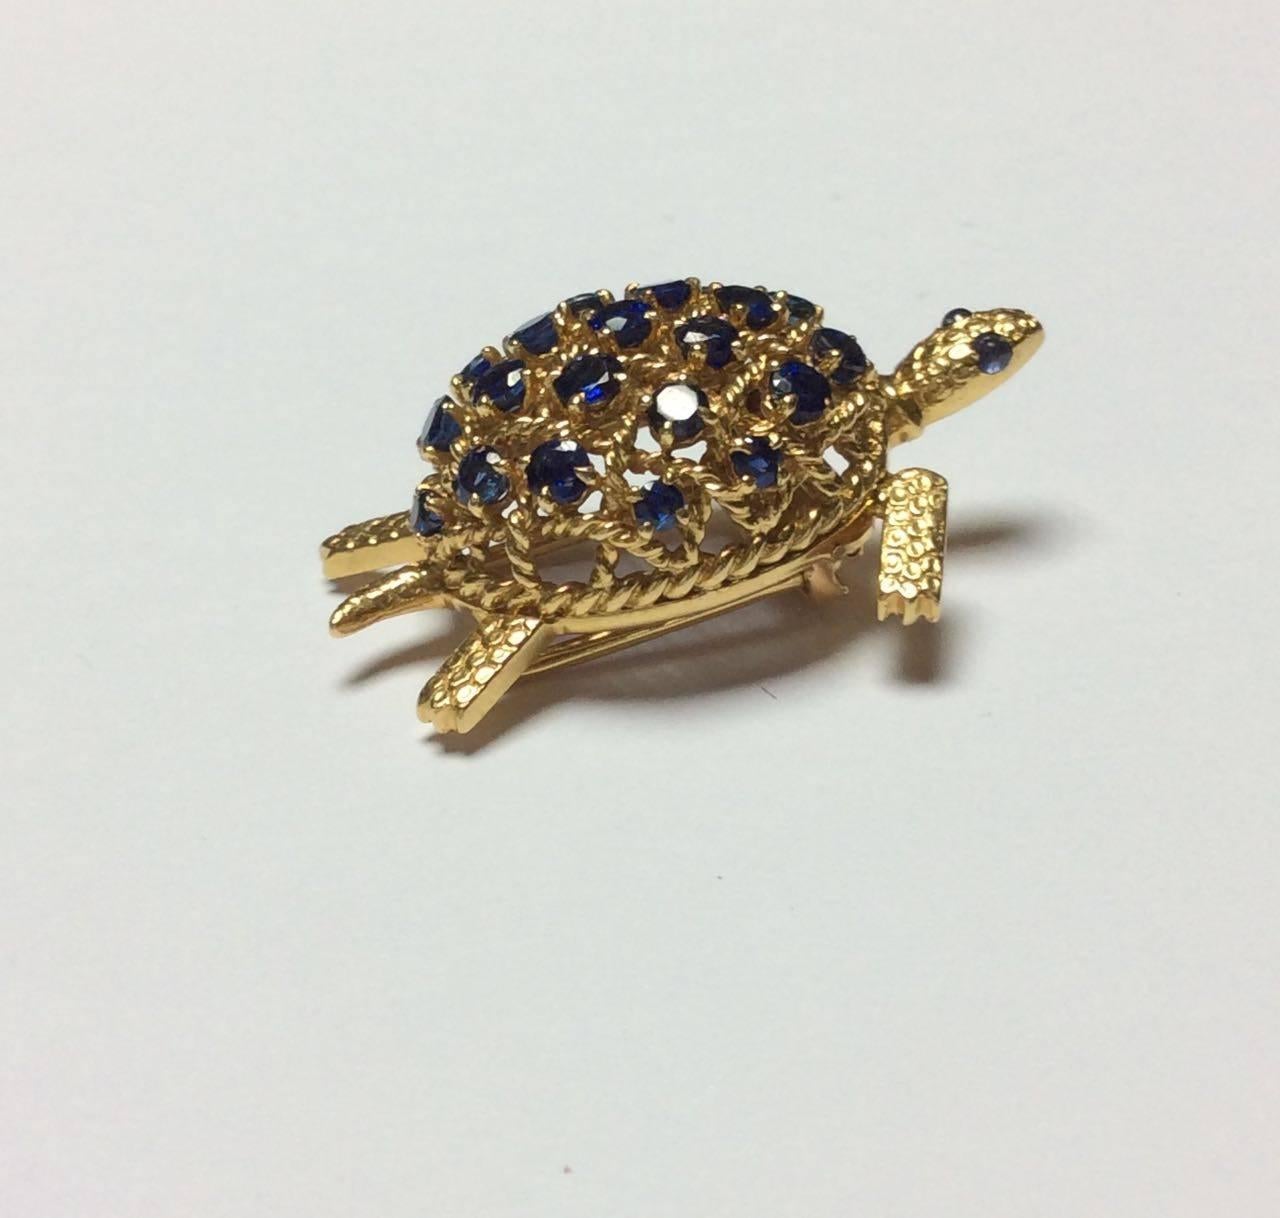 Turtle brooch by Cartier, a cabochon sapphire and sapphires, 18K gold. Circa 1960.